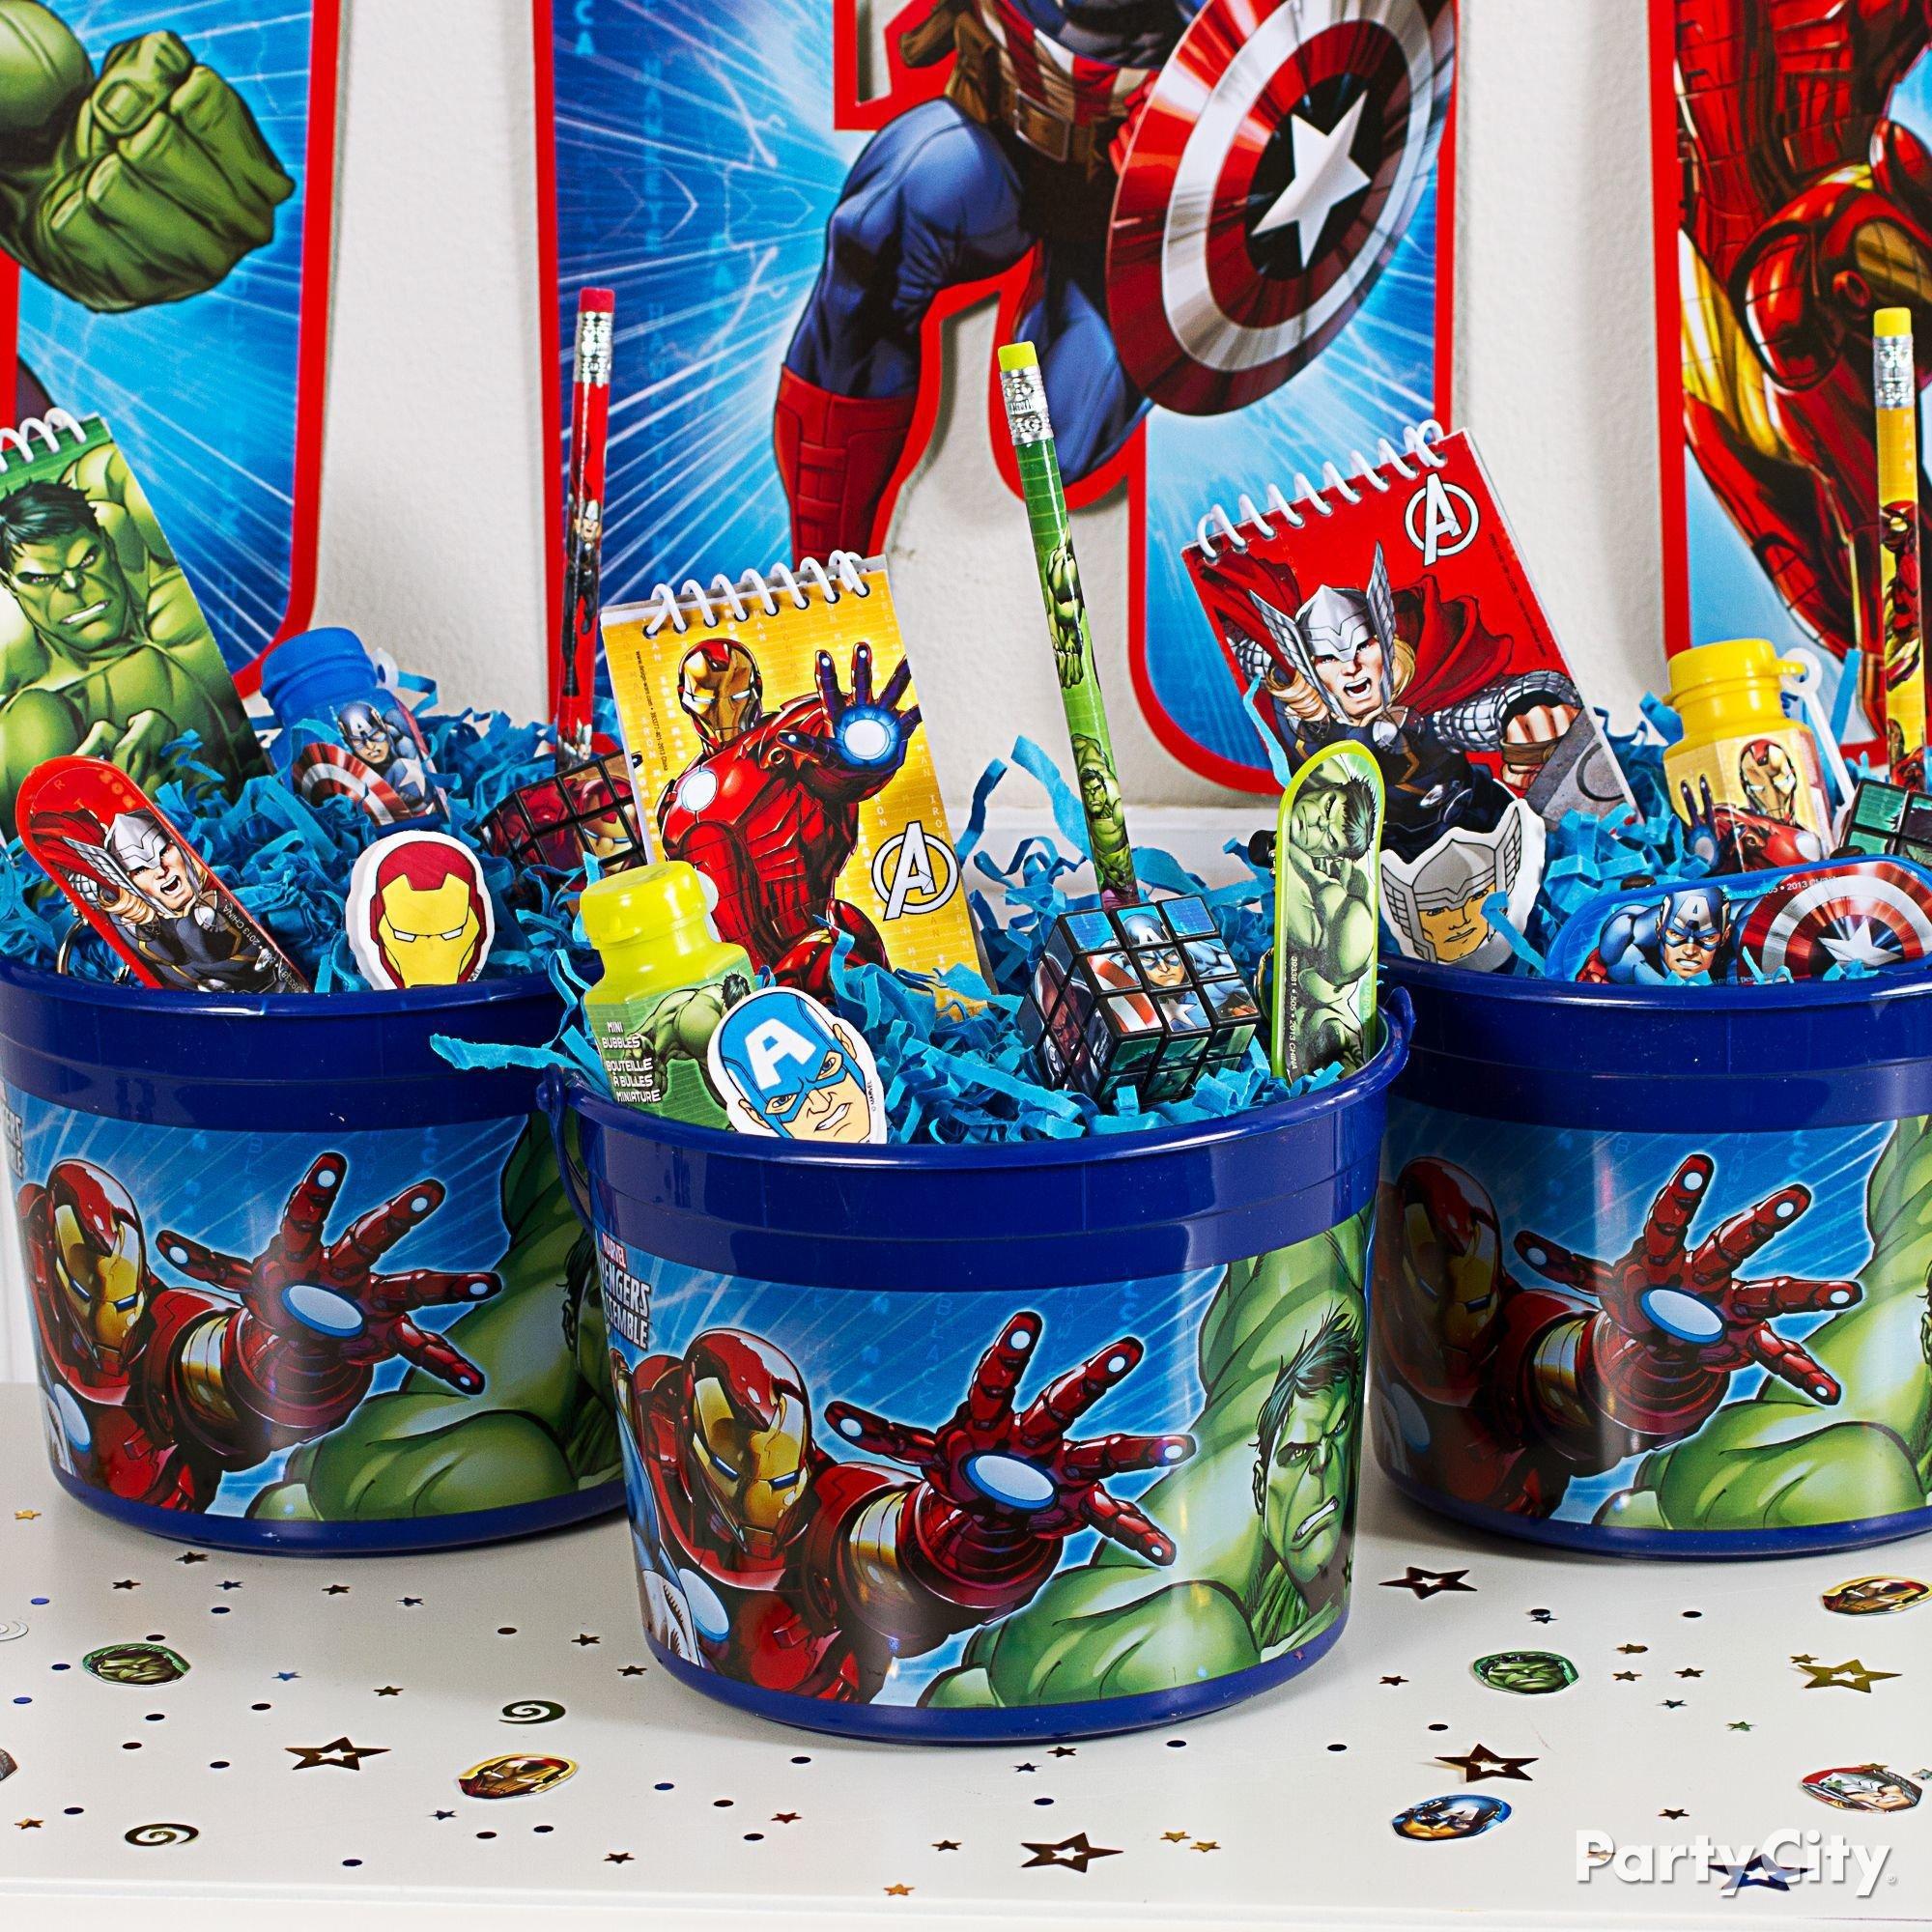 Avengers Favor Container